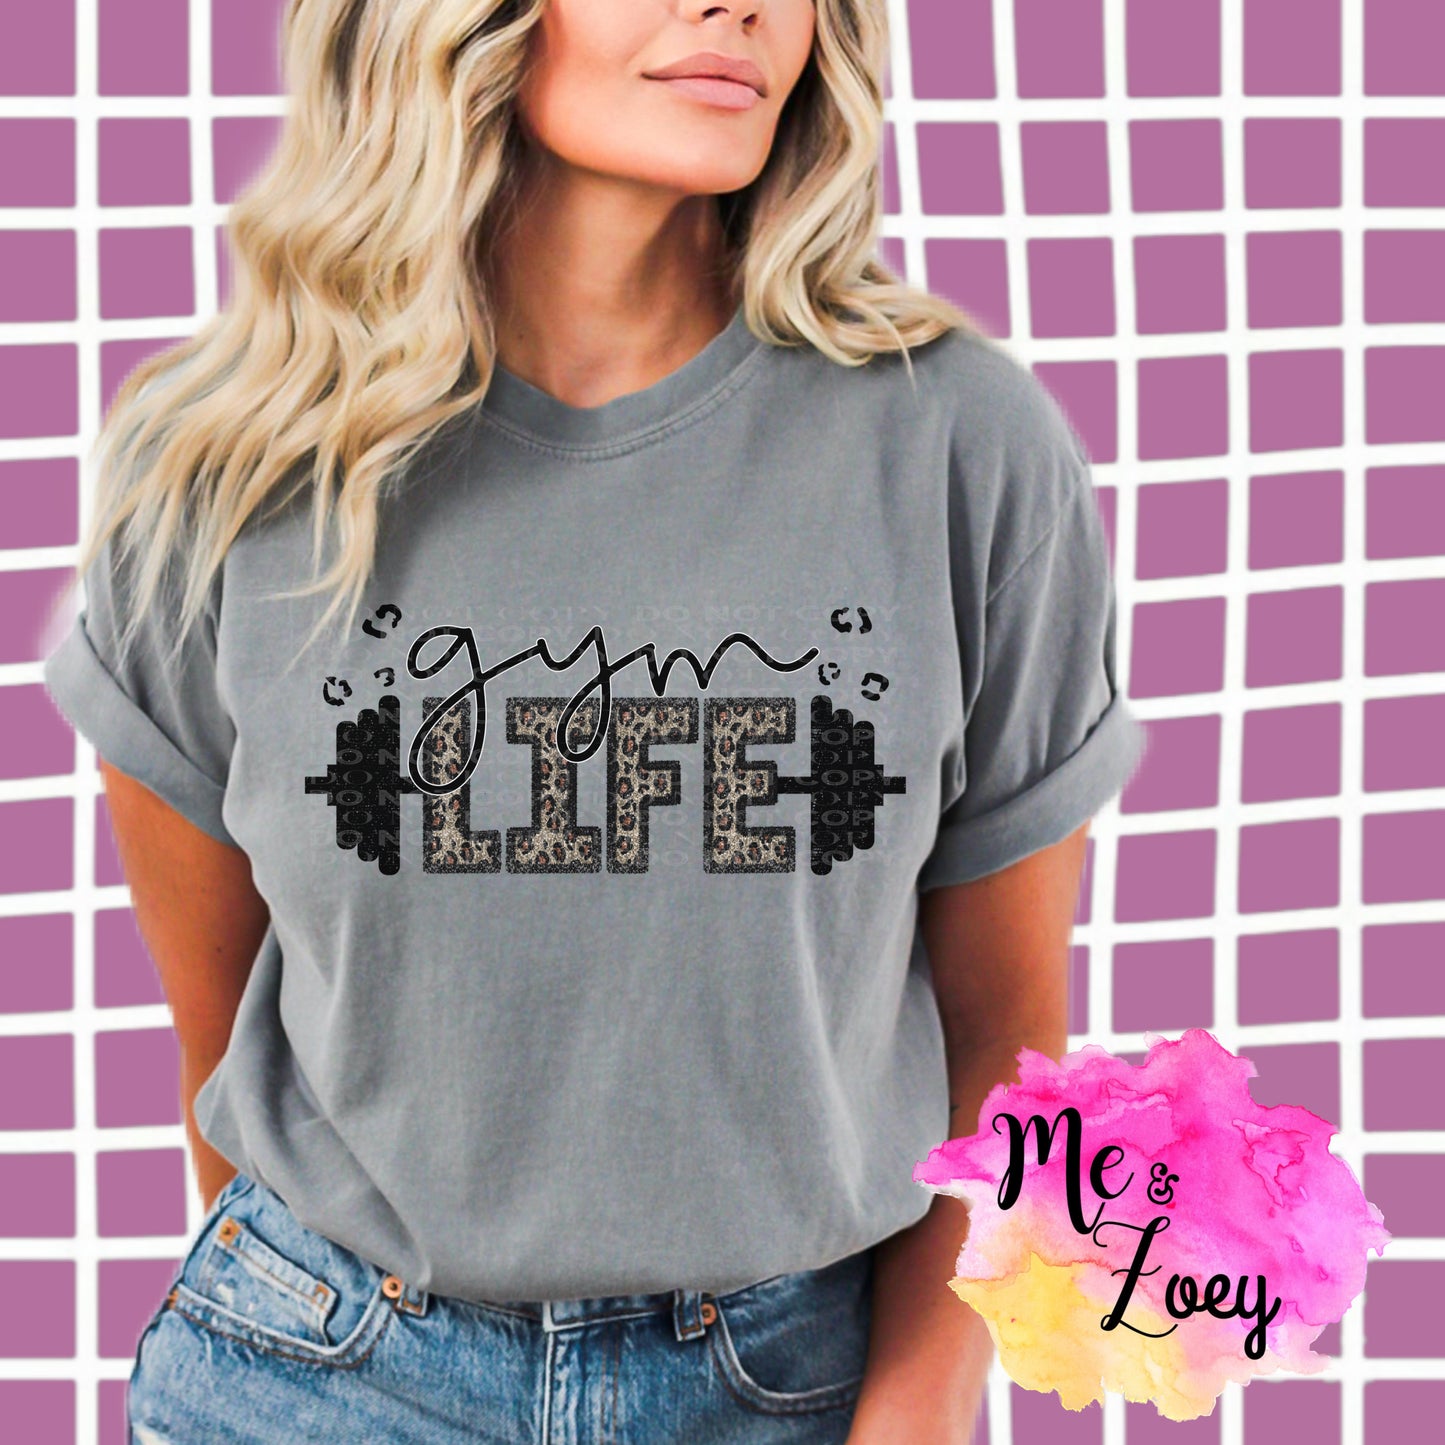 Gym Life Graphic Tee - MeAndZoey